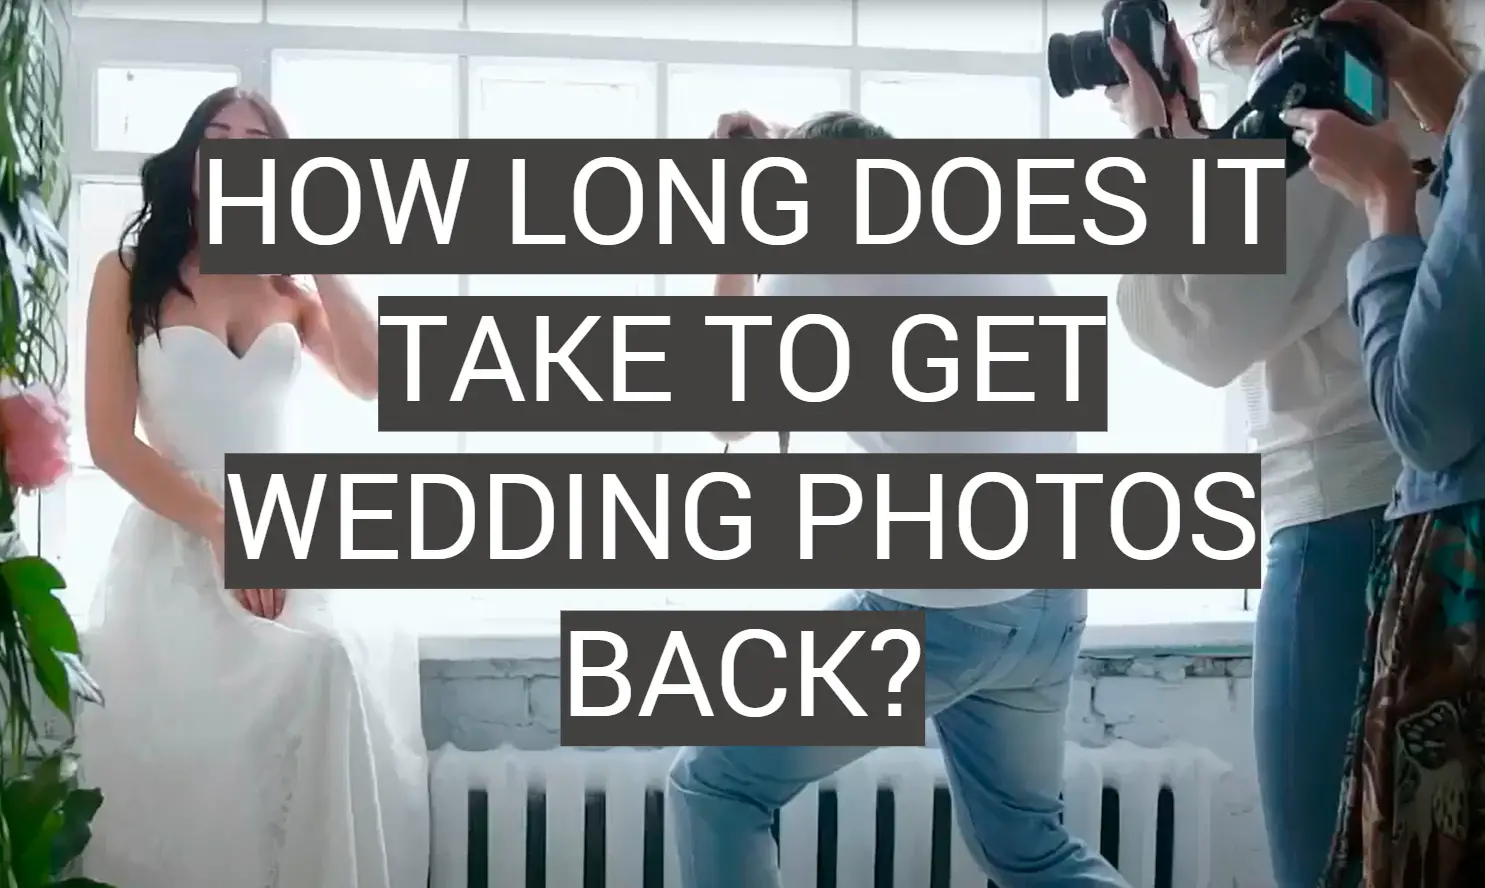 How Long Does it Take to Get Wedding Photos Back?